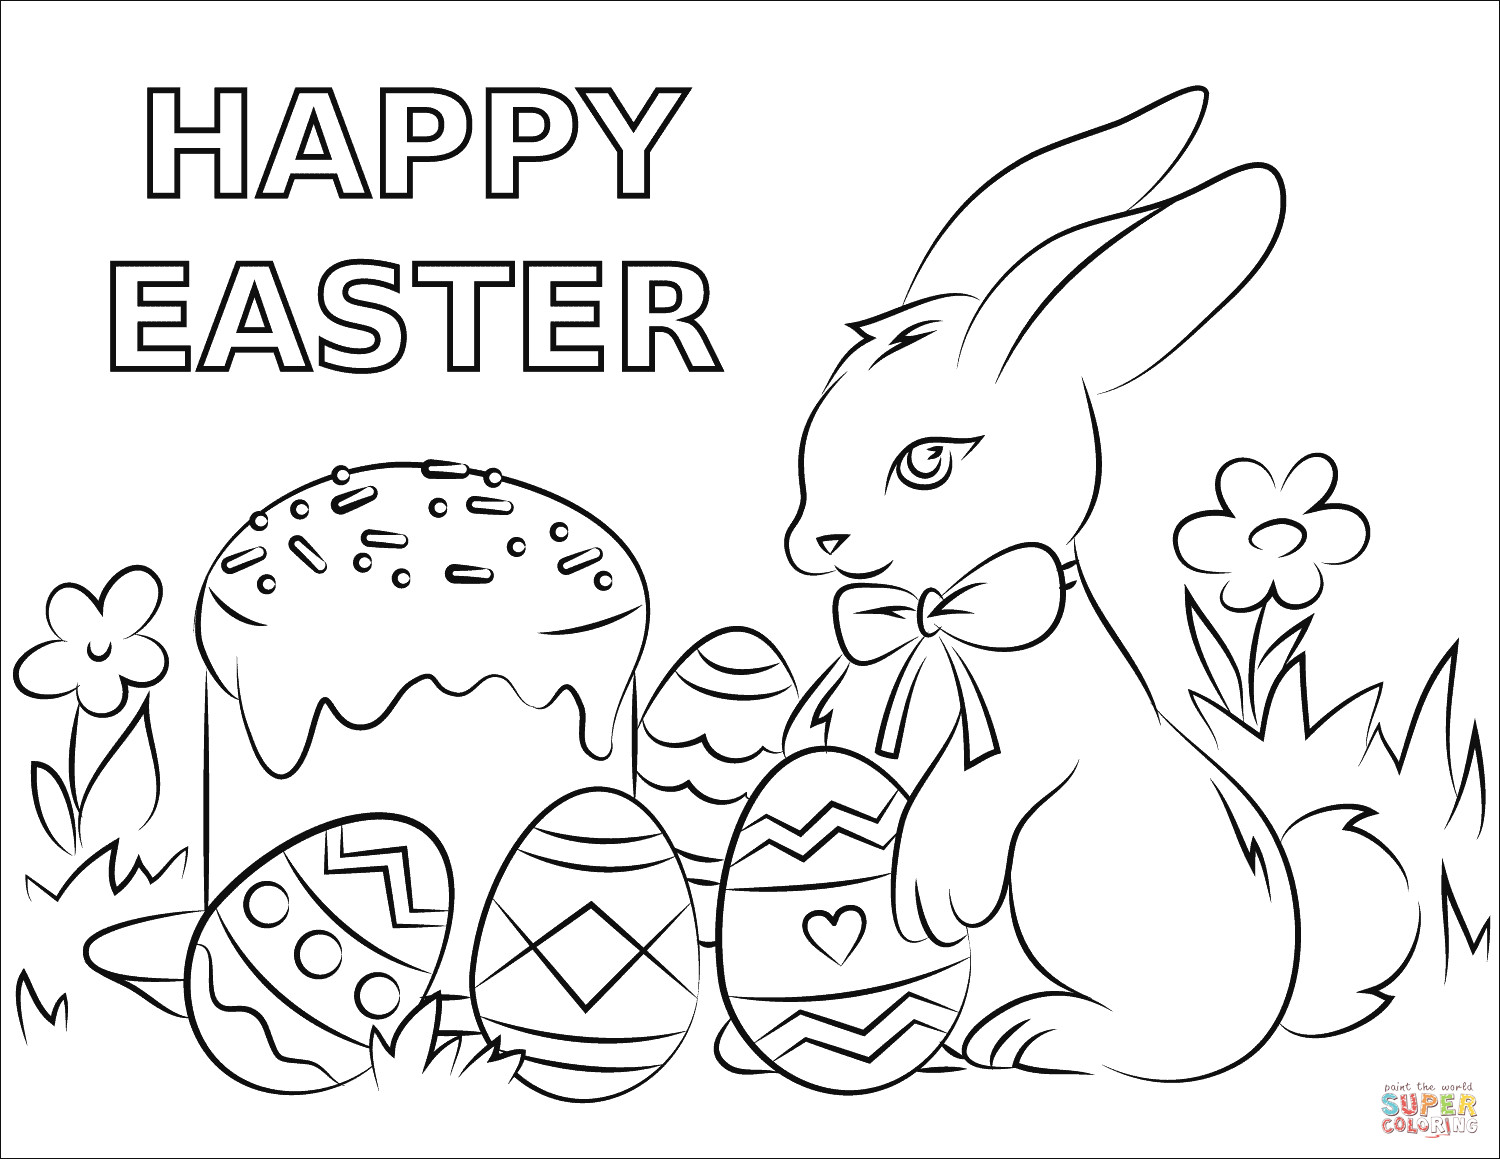 Happy Easter Coloring Pages Free Printable
 Coloring Pages Bunnies Chocolate Bar